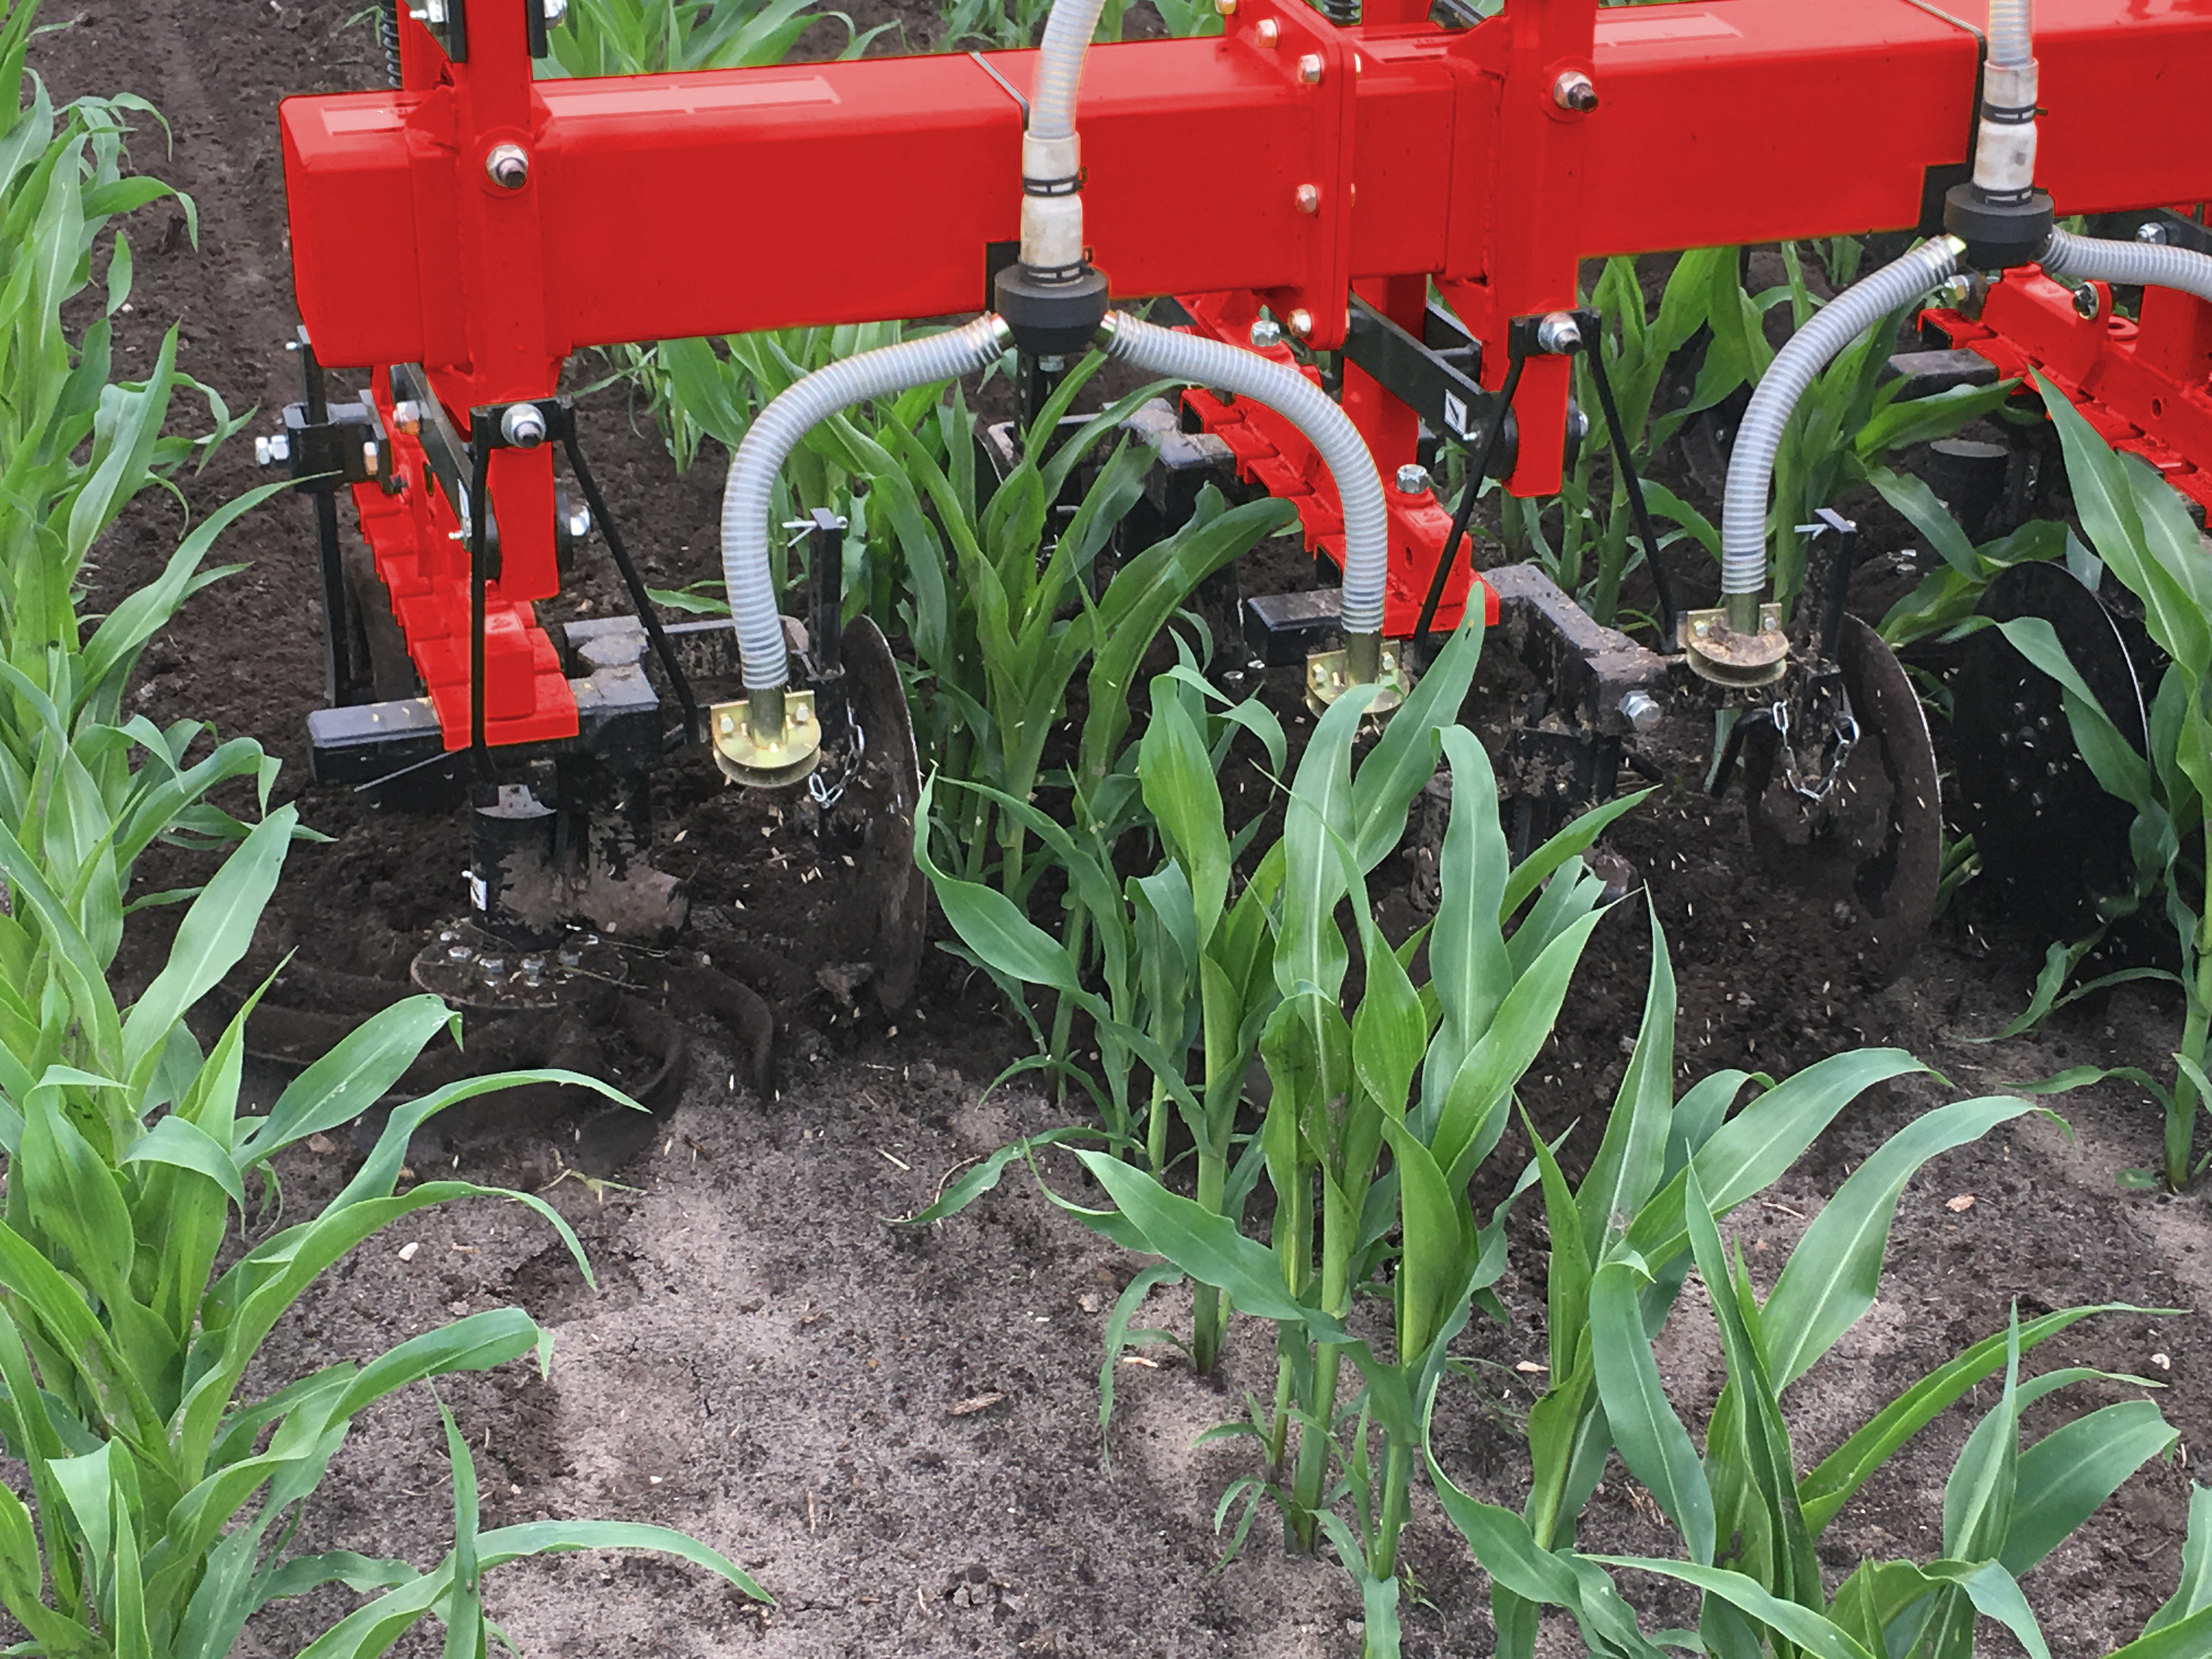 Slurry injection and hoeing of maize land in one pass, with seed drill for undersowing under maize 